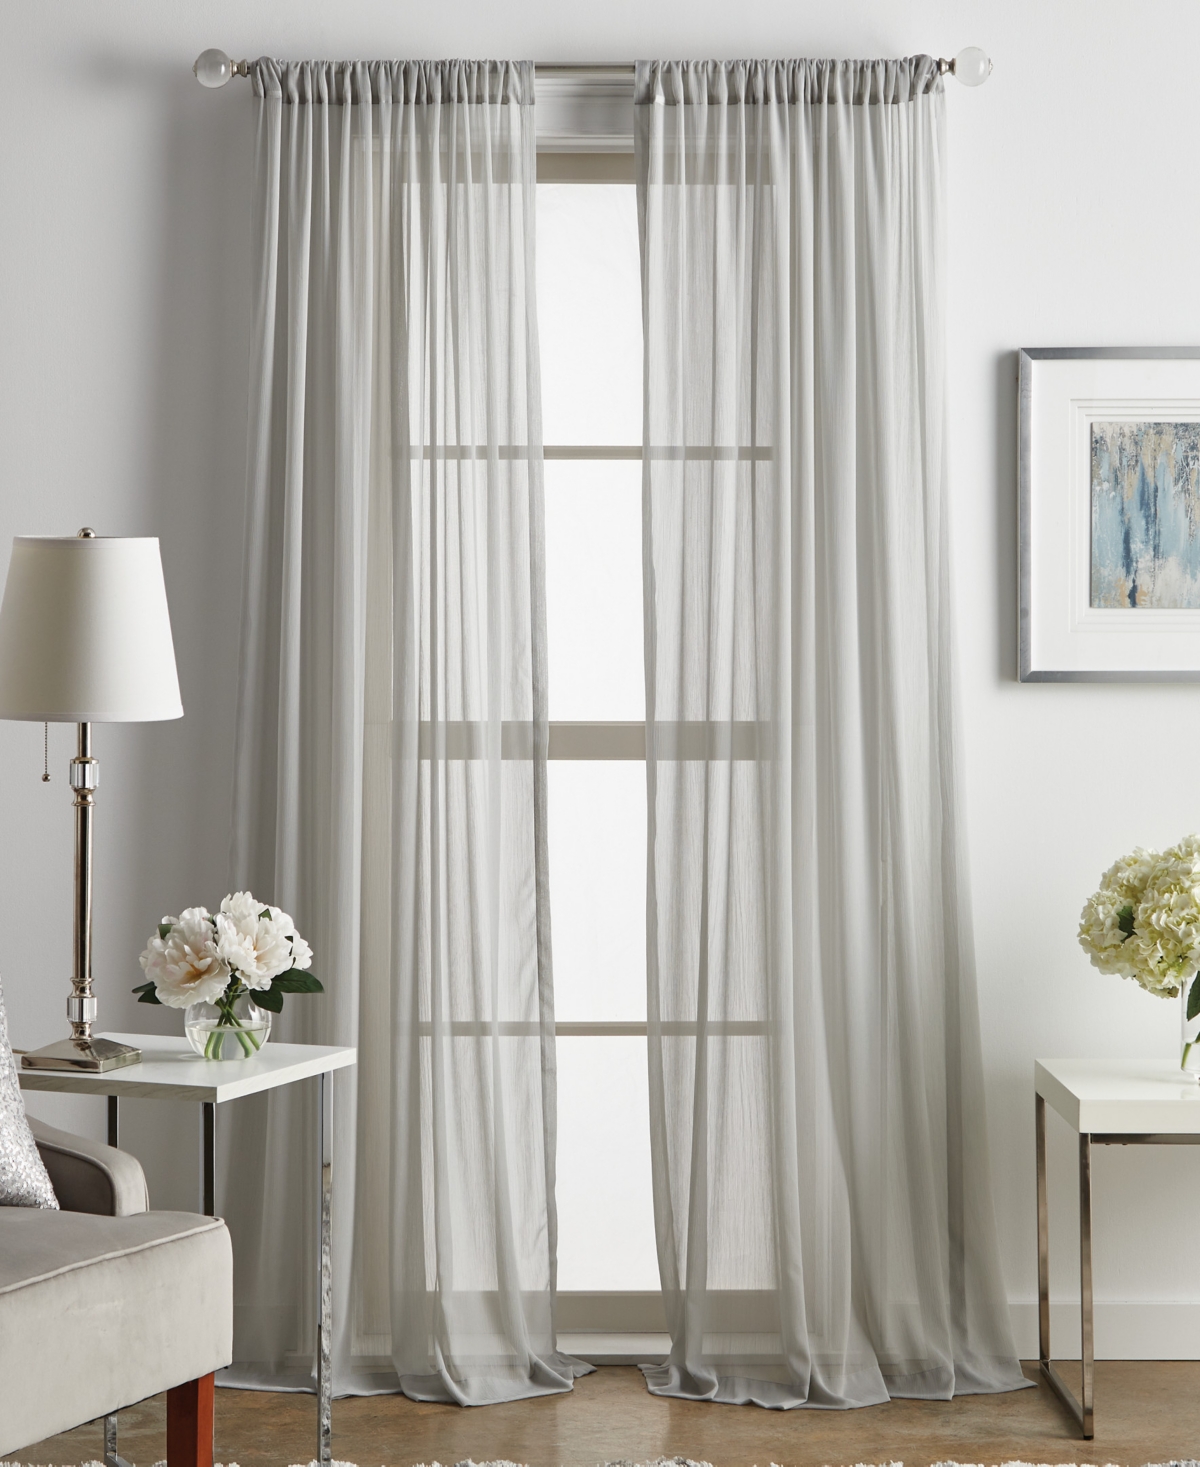 Glacier Poletop Sheer Curtain Panel Set, 84", Created For Macy's - Silver-Tone